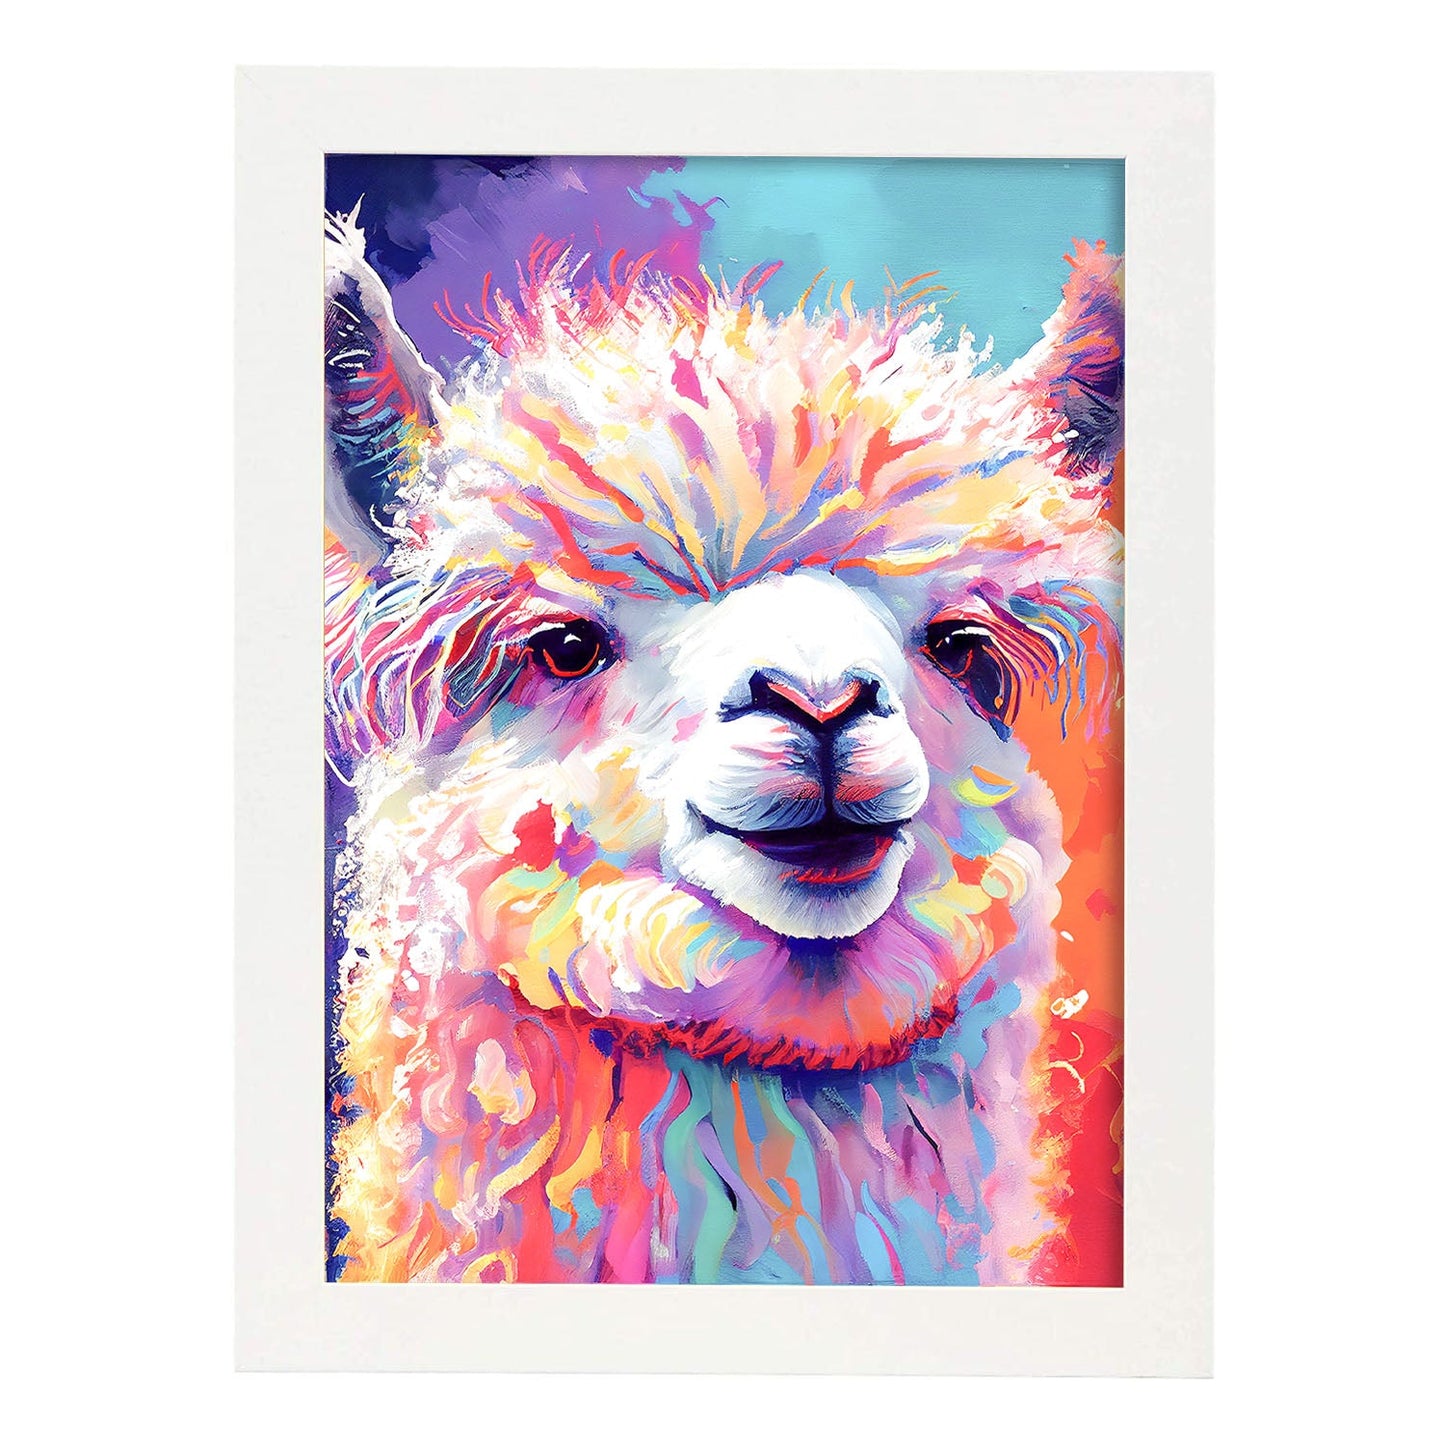 Nacnic Abstract smiling Alpaca in Lisa Fran Style_1. Aesthetic Wall Art Prints for Bedroom or Living Room Design.